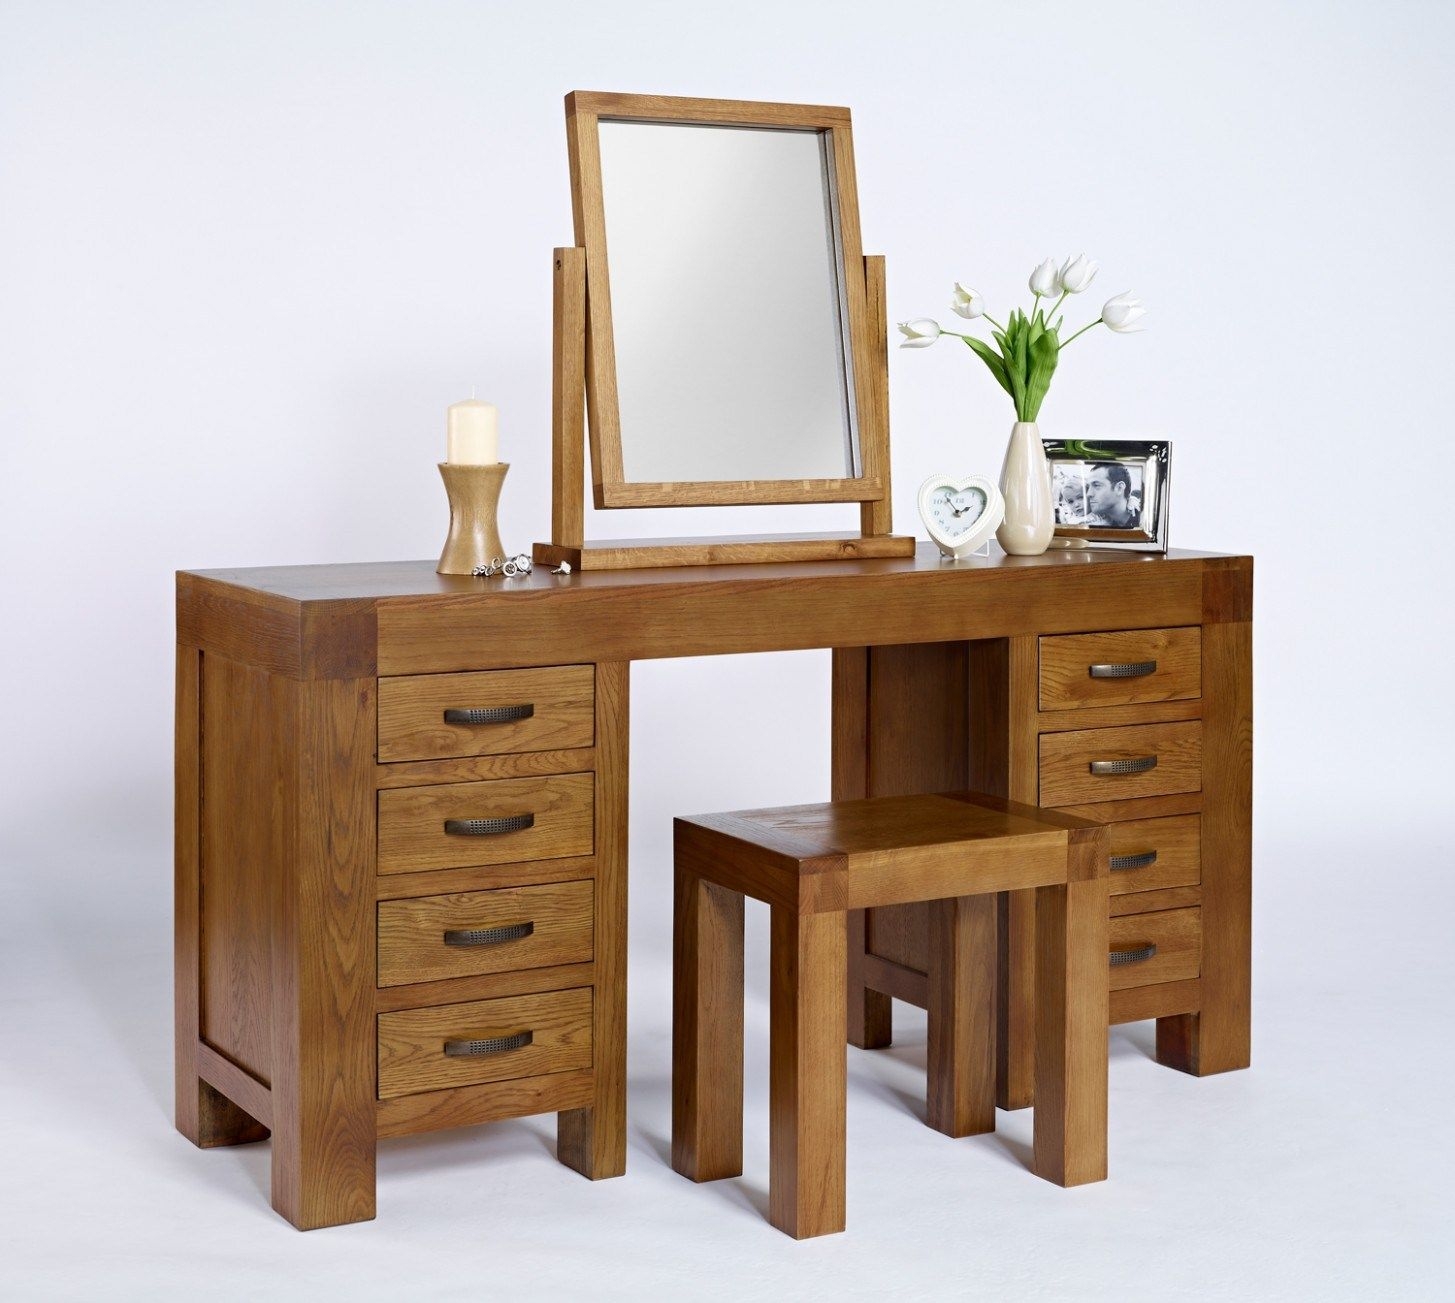 Table mirror and stool furnishing styles traditional vanity bedroom